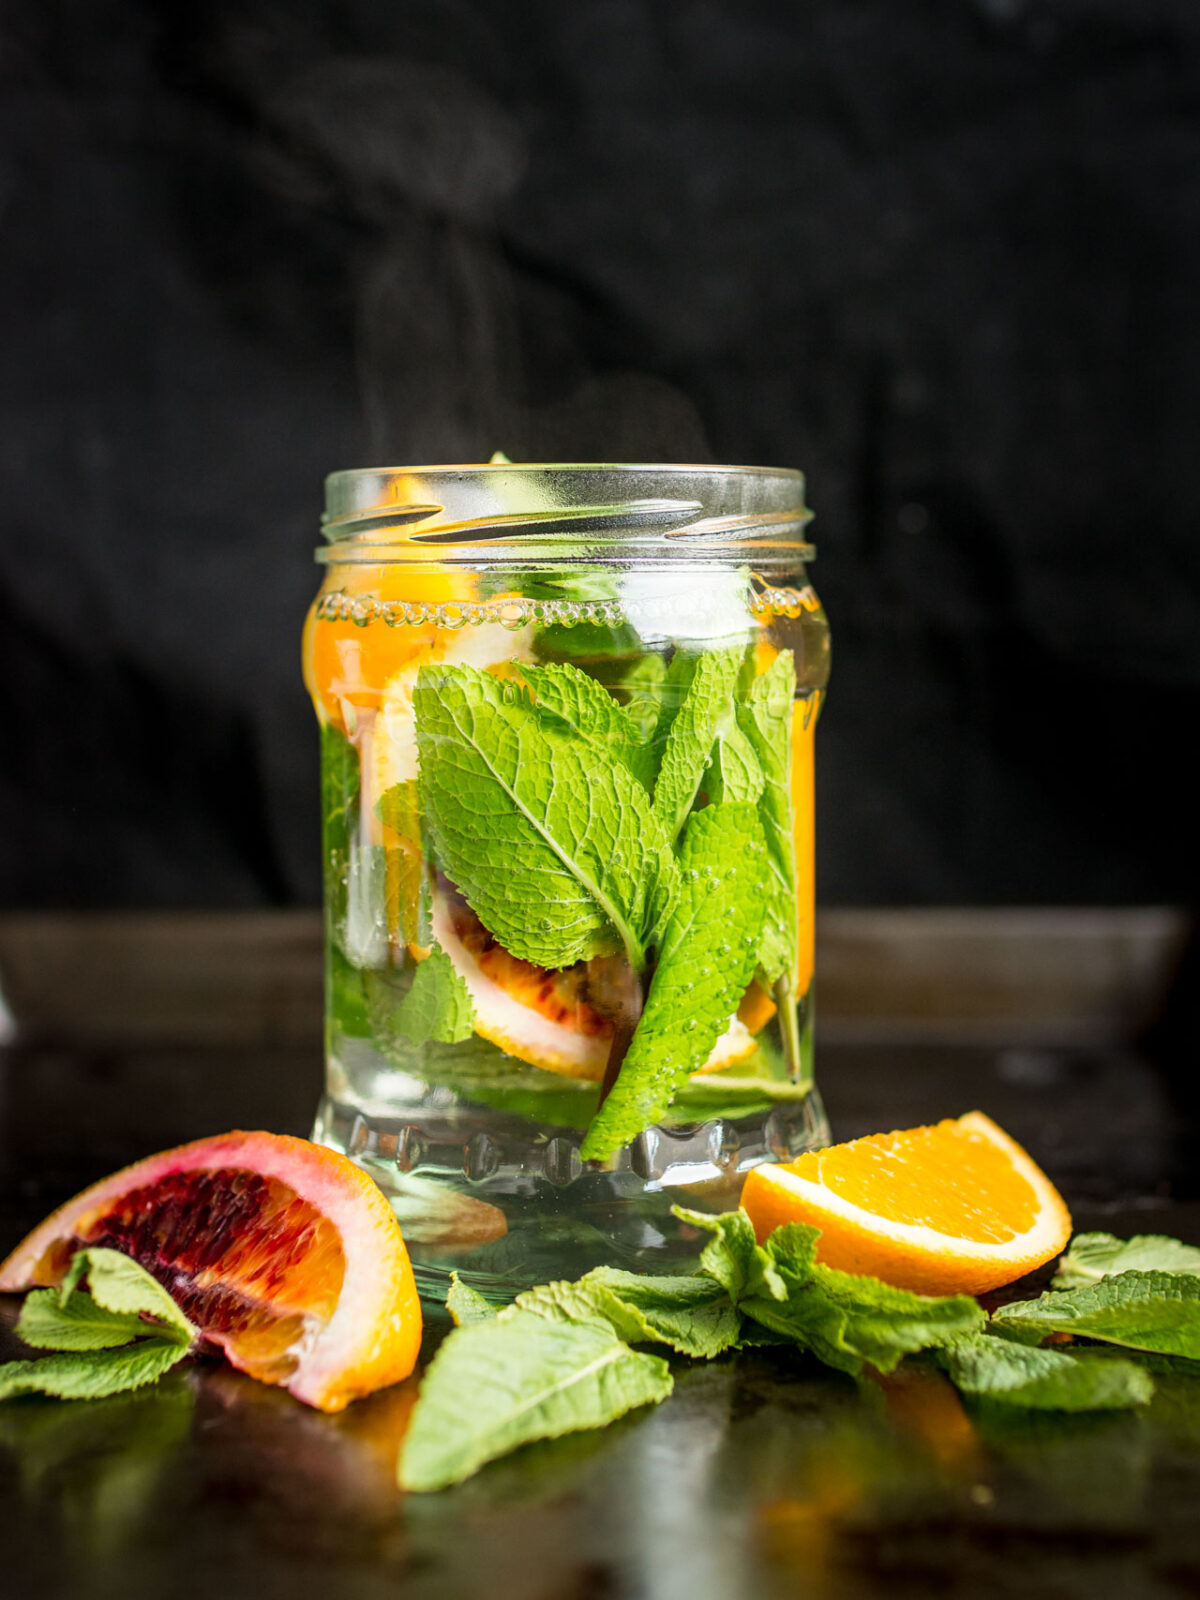 A glass jar containing sliced oranges and fresh mint sprigs floating in hot water to create a refreshing tea.